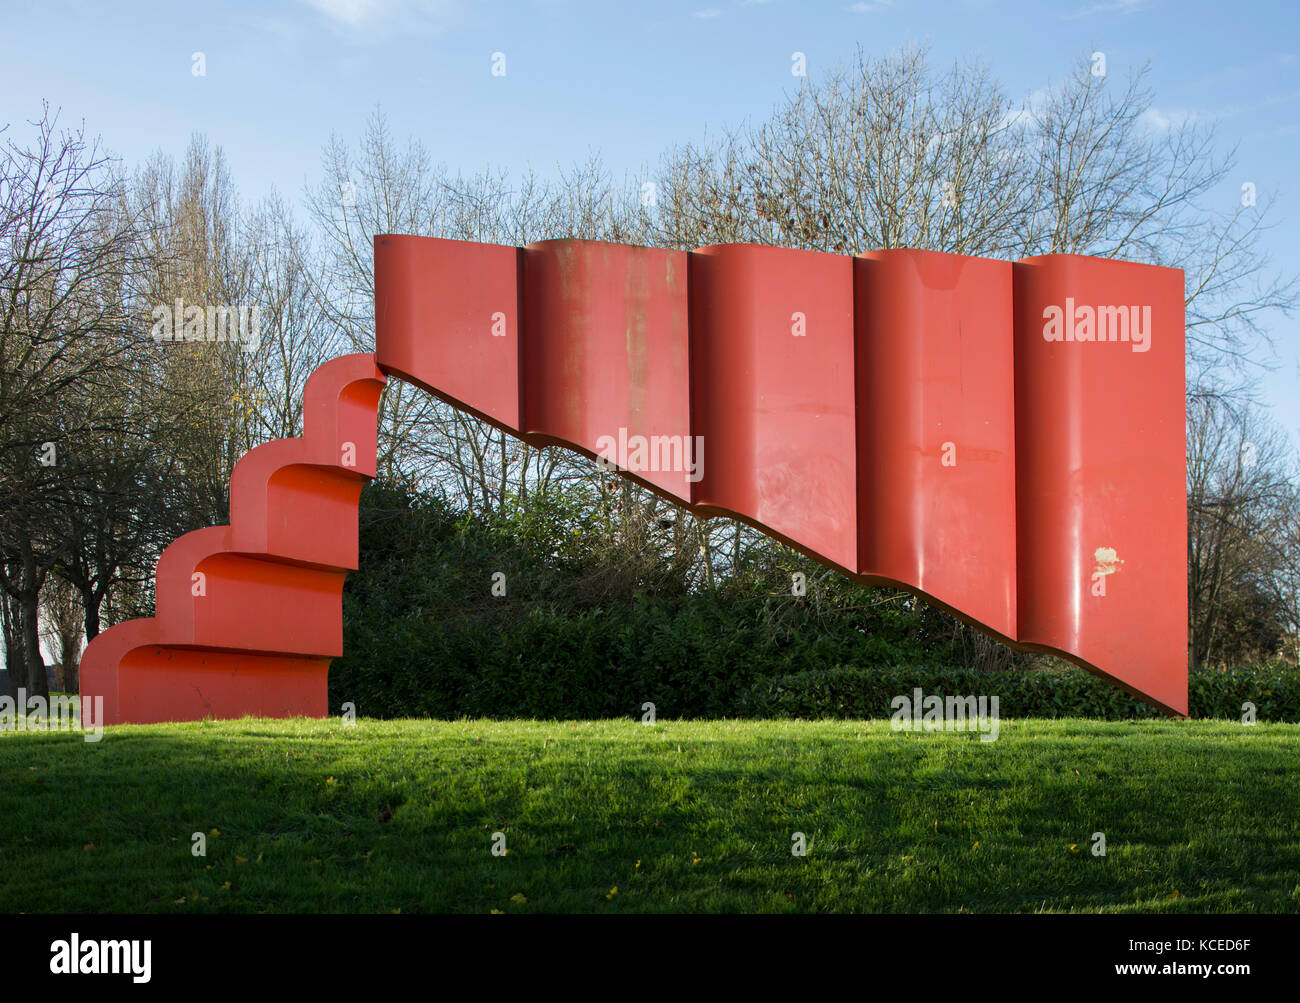 Challenge House, Sherwood Drive, Bletchley, Milton Keynes. The Art of Silence sculpture by Bernard Schottlander. View from north. Photographed by Patr Stock Photo